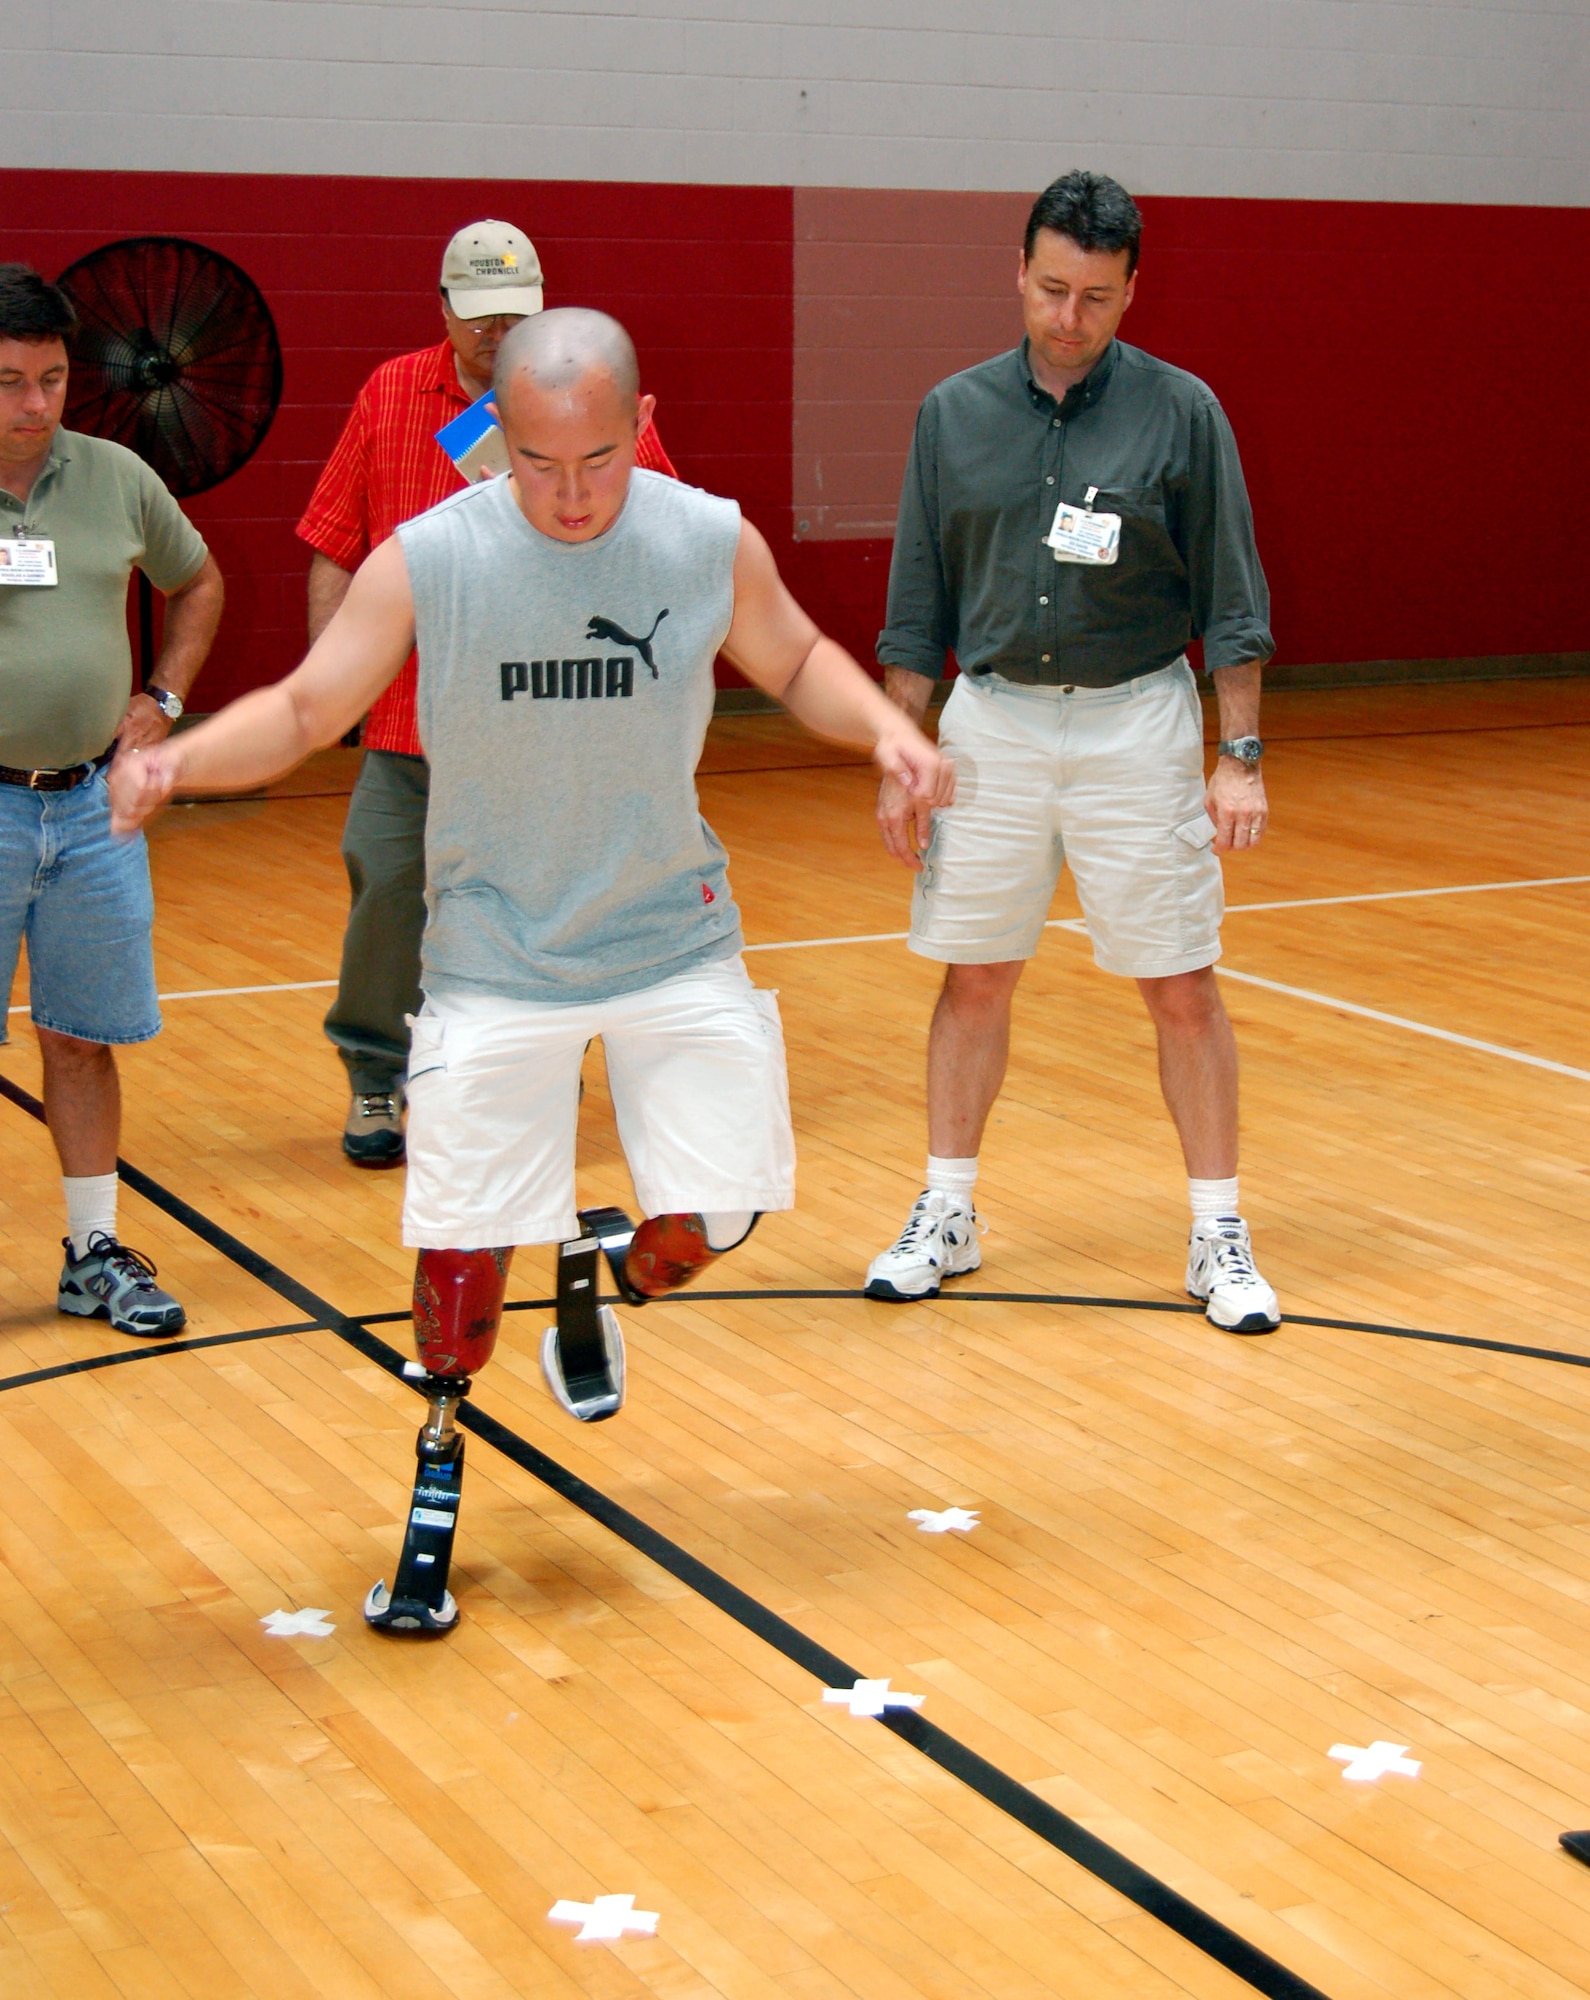 Retired Army Sgt. Chang Wong demonstrates a balance and agility exercise for Veterans Affairs therapists and prosthetists during a military amputee advance skills training workshop at the Jimmy Brought Fitness Center on Fort Sam Houston, Texas, on May 12, 2006. The Brooke Army Medical Center hosted the workshop to train VA therapists in the needs of today's military amputees. (U.S Air Force photo/Staff Sgt. Shad Eidson)